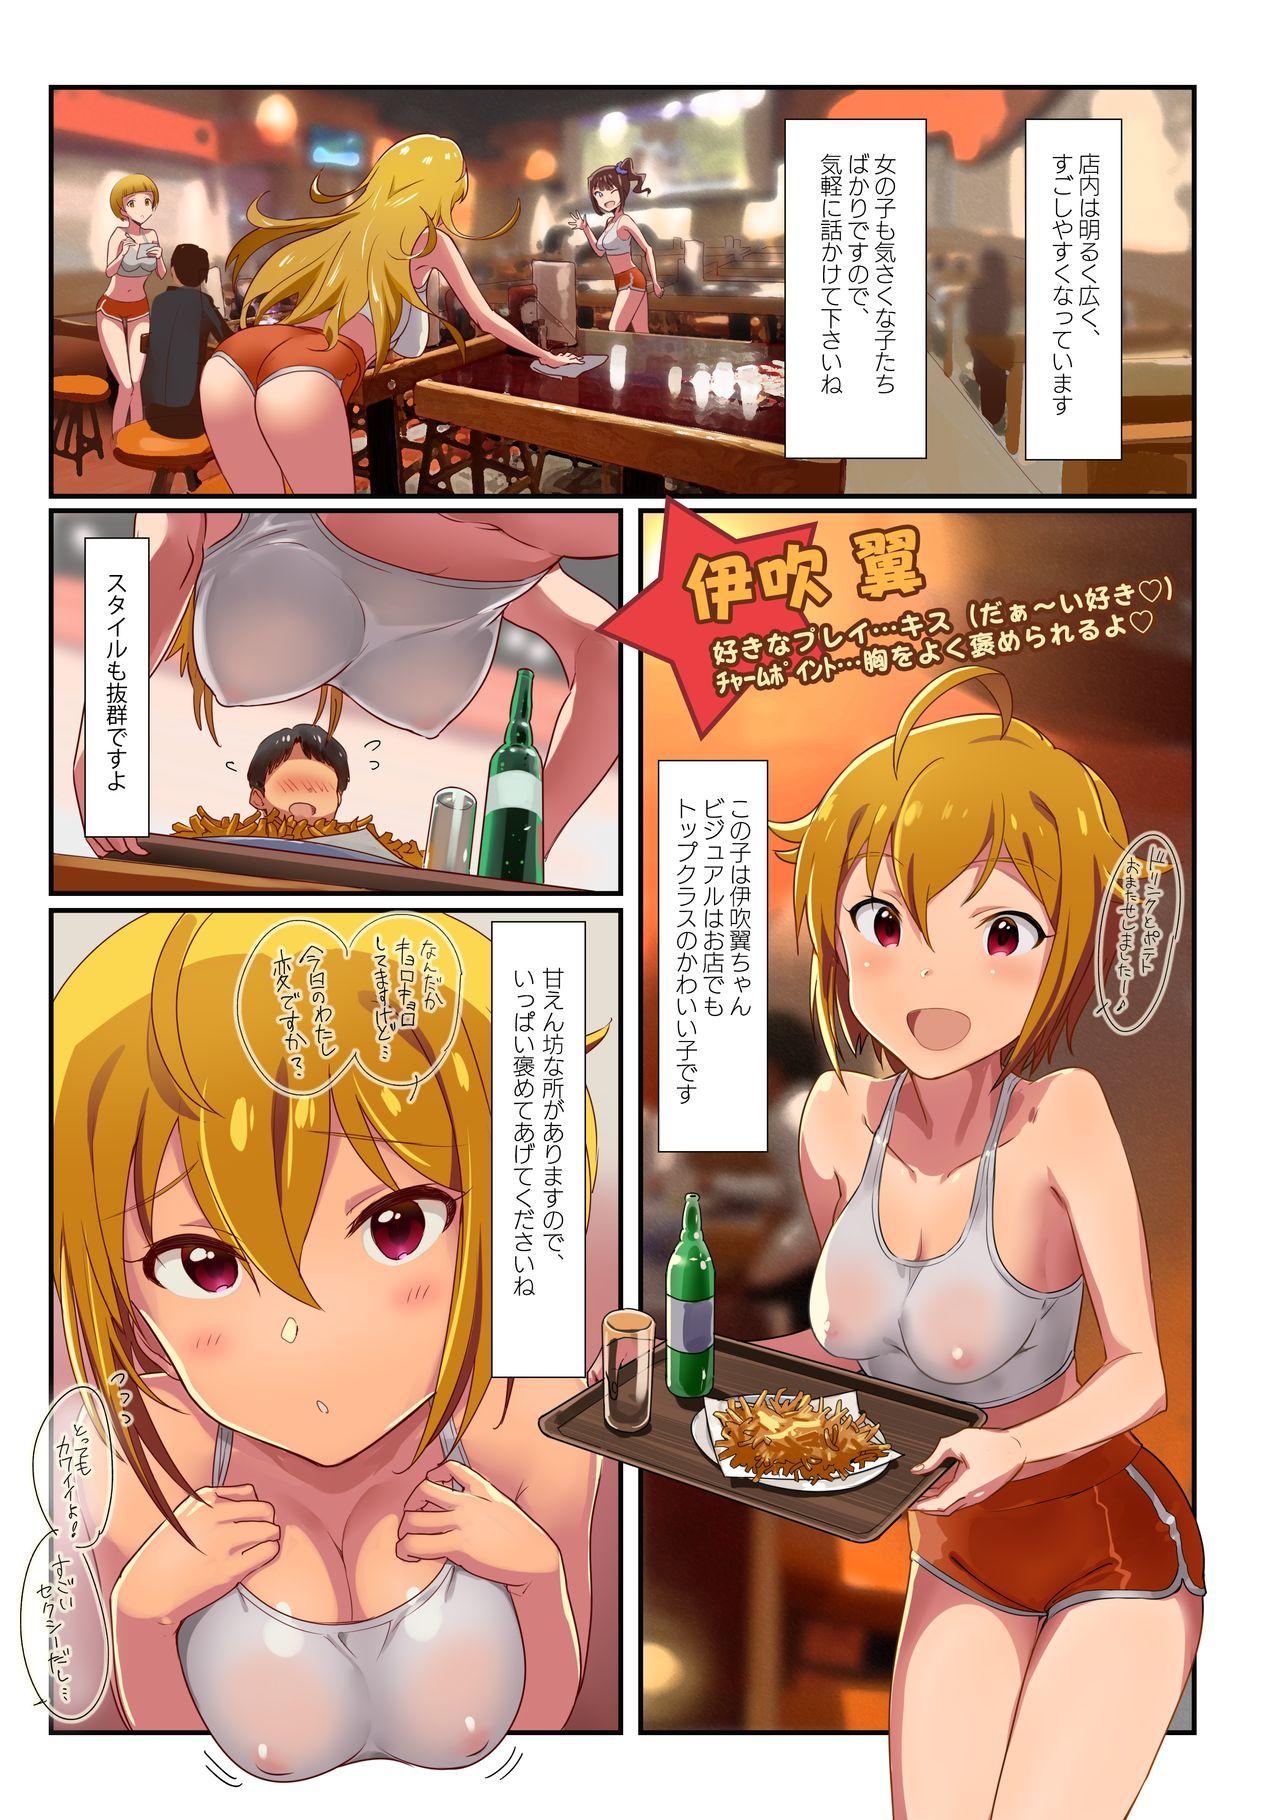 Best Blowjob Ever Oshigoto Theater 6 - The idolmaster Hidden - Page 3